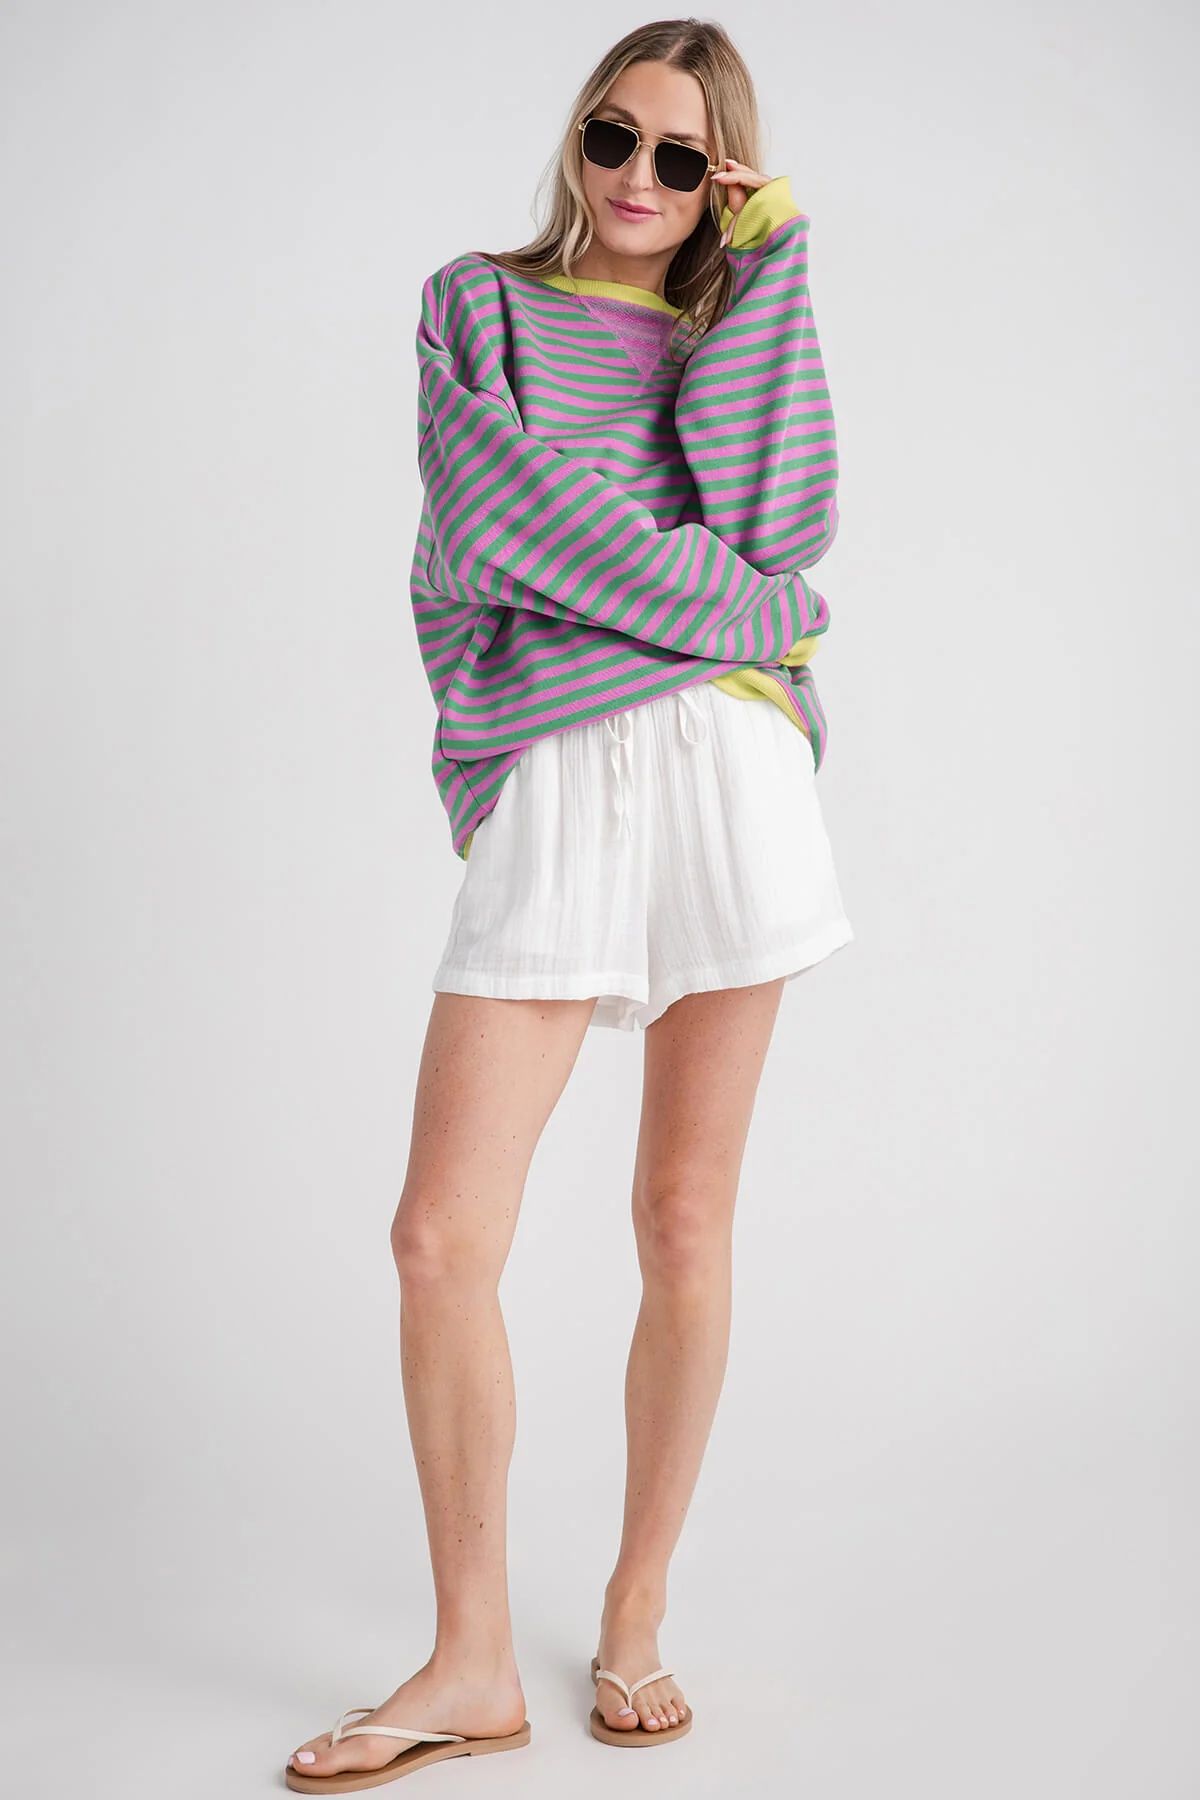 Free People Classic Striped Crewneck | Social Threads